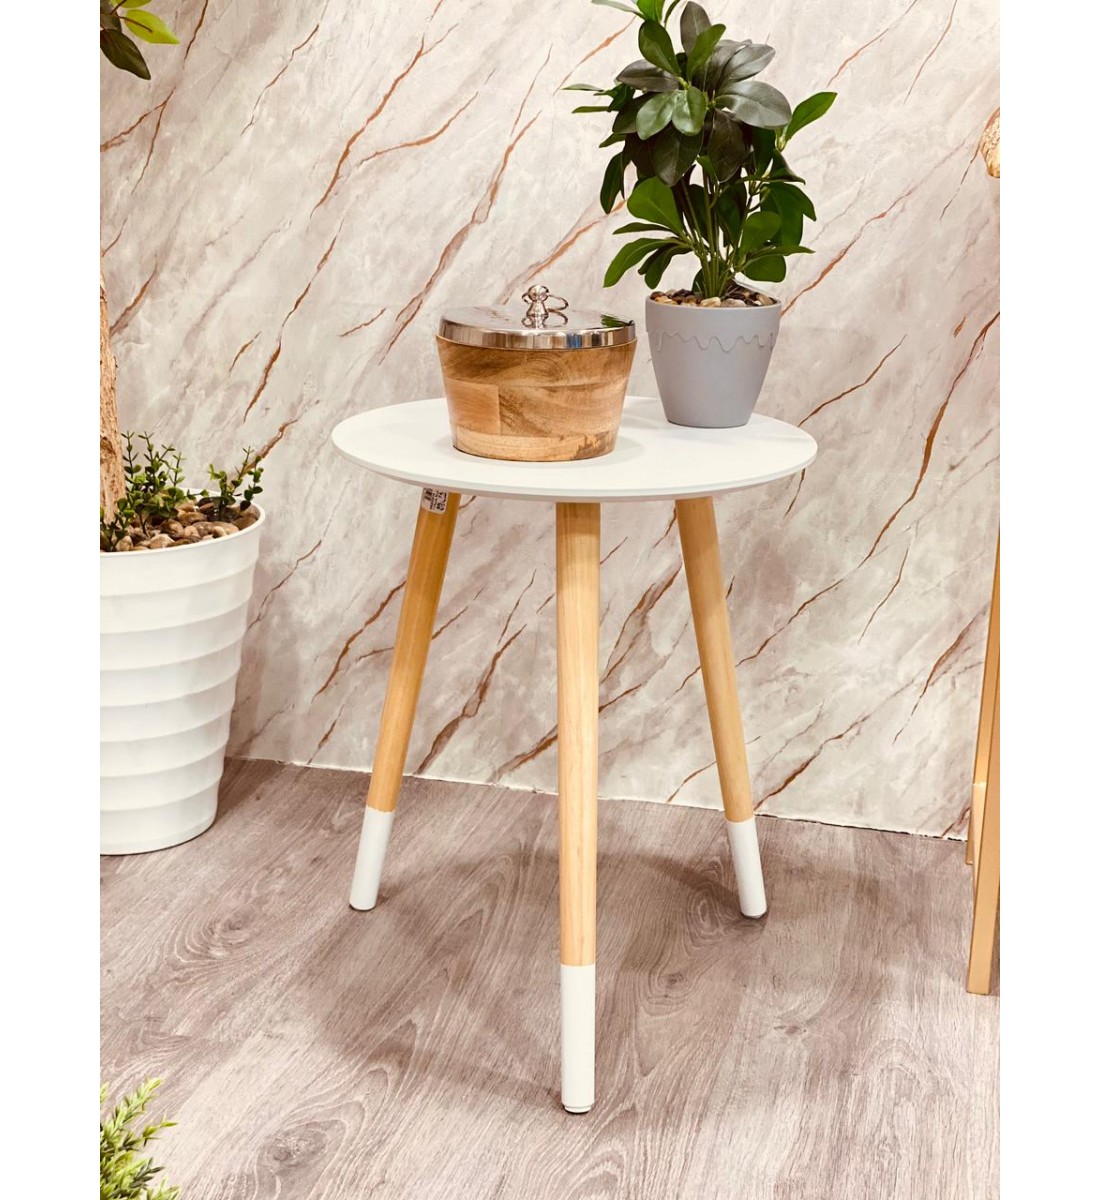 Round wood serving table 40 * 40 * 50 cm